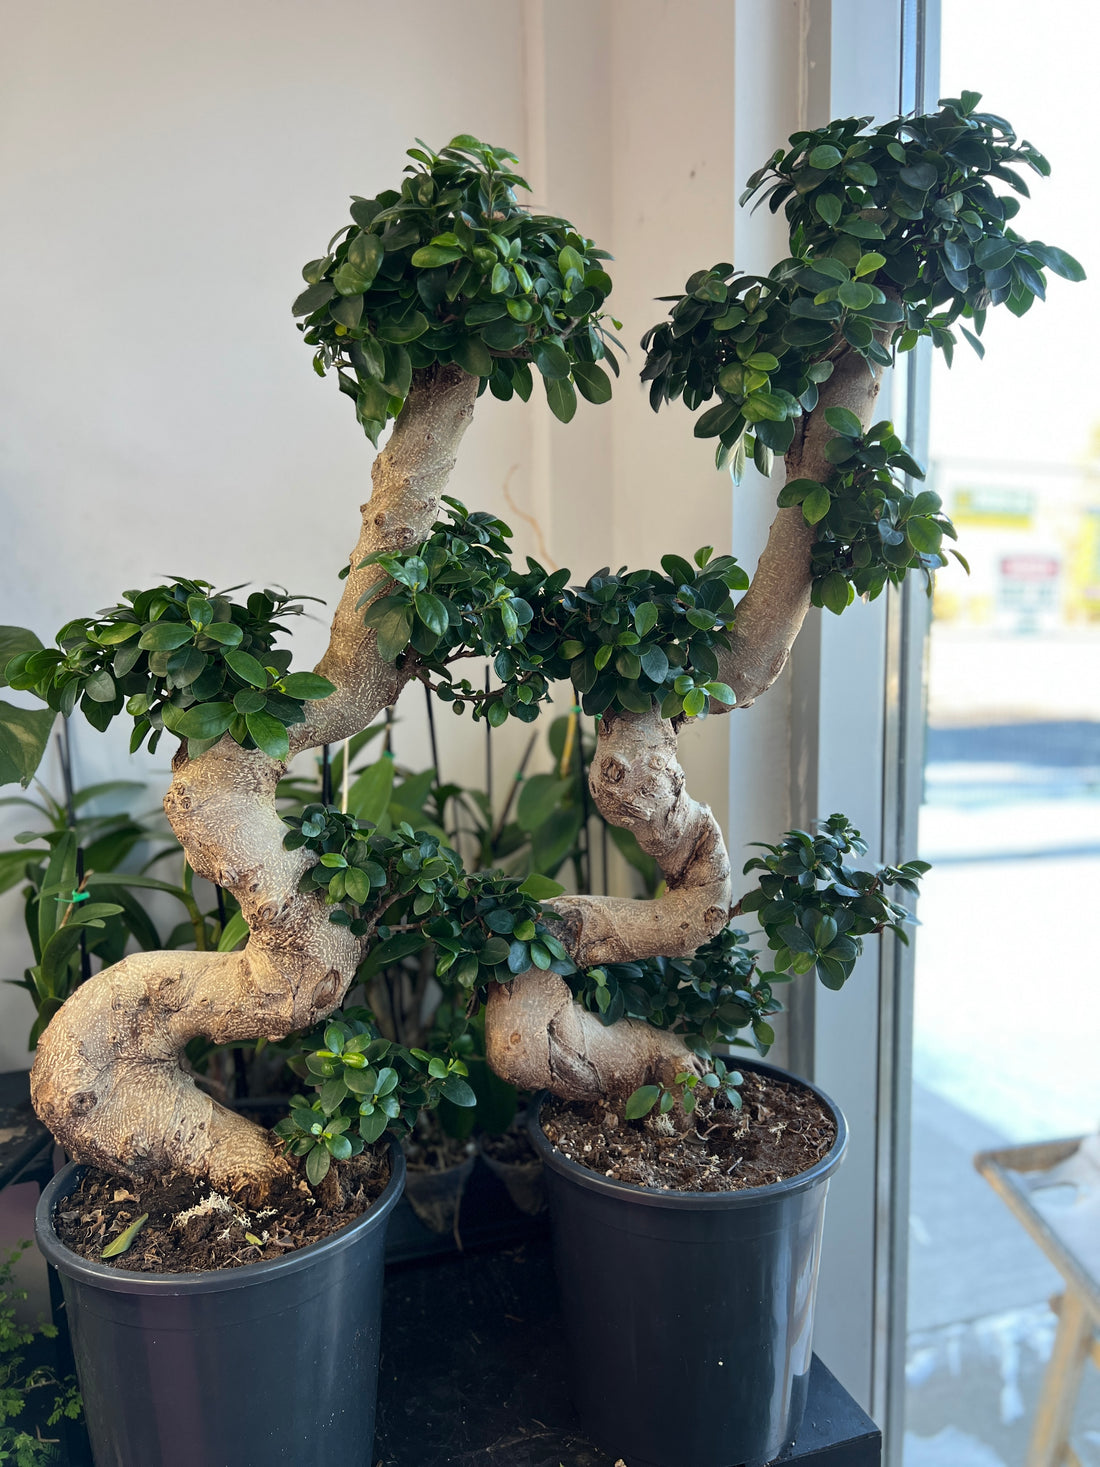 Large Ginseng in a grow pot 